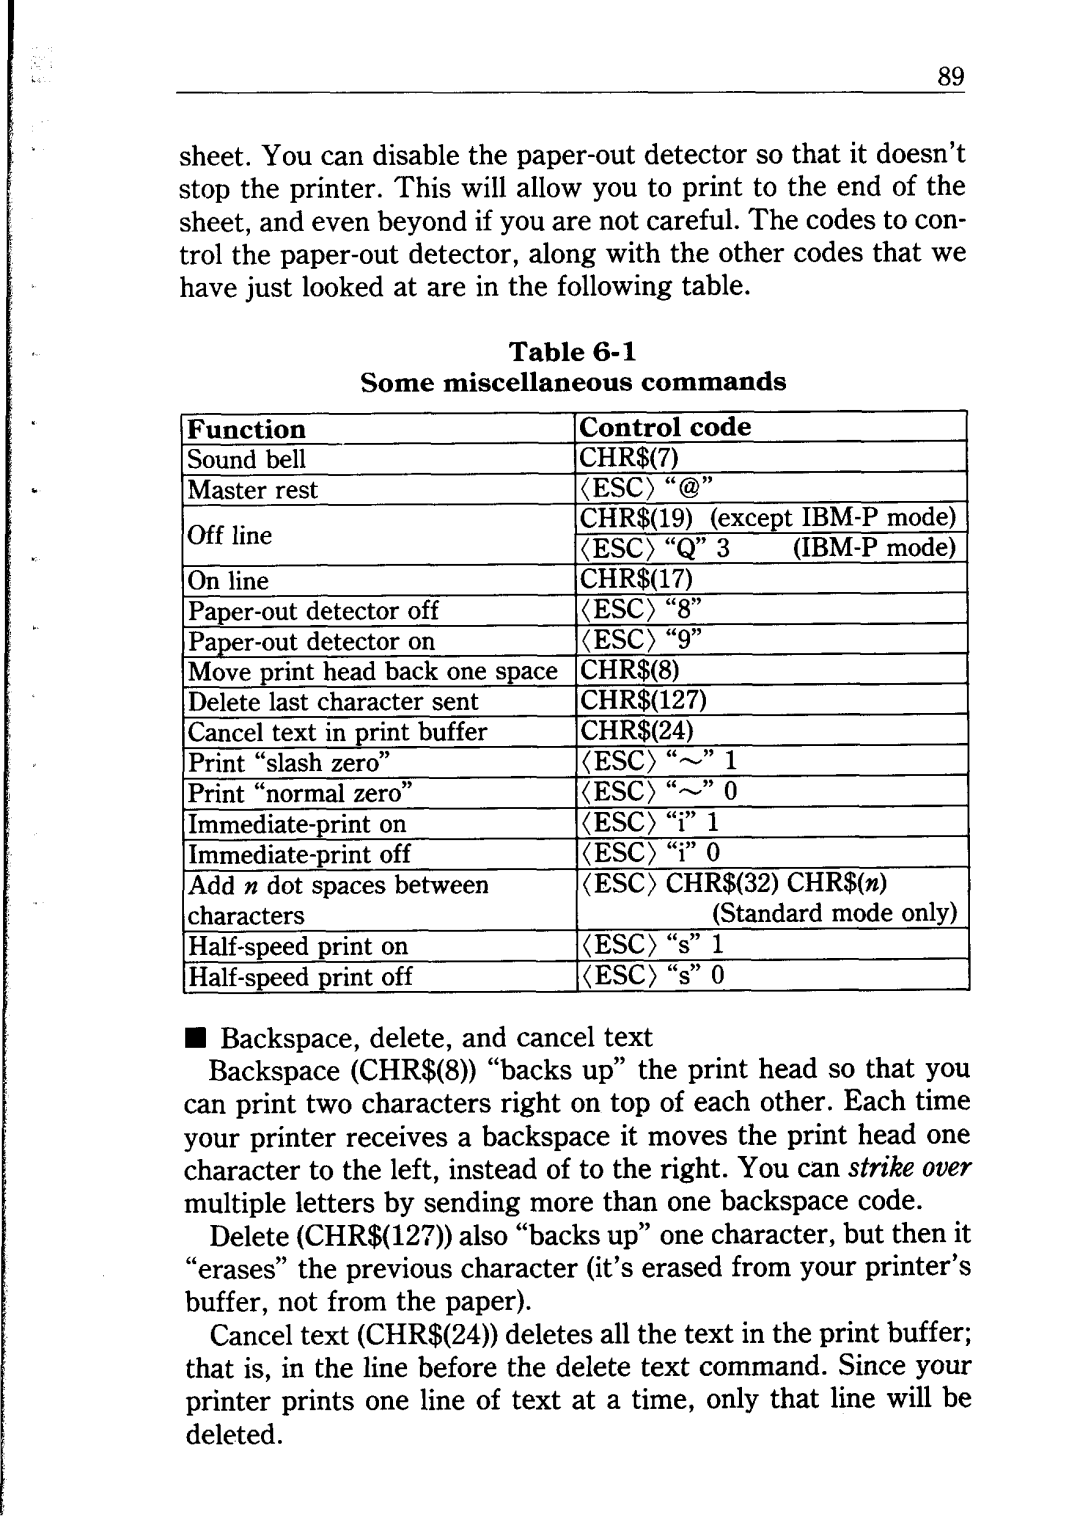 Star Micronics NB24-10/15 user manual Some miscellaneous commands 